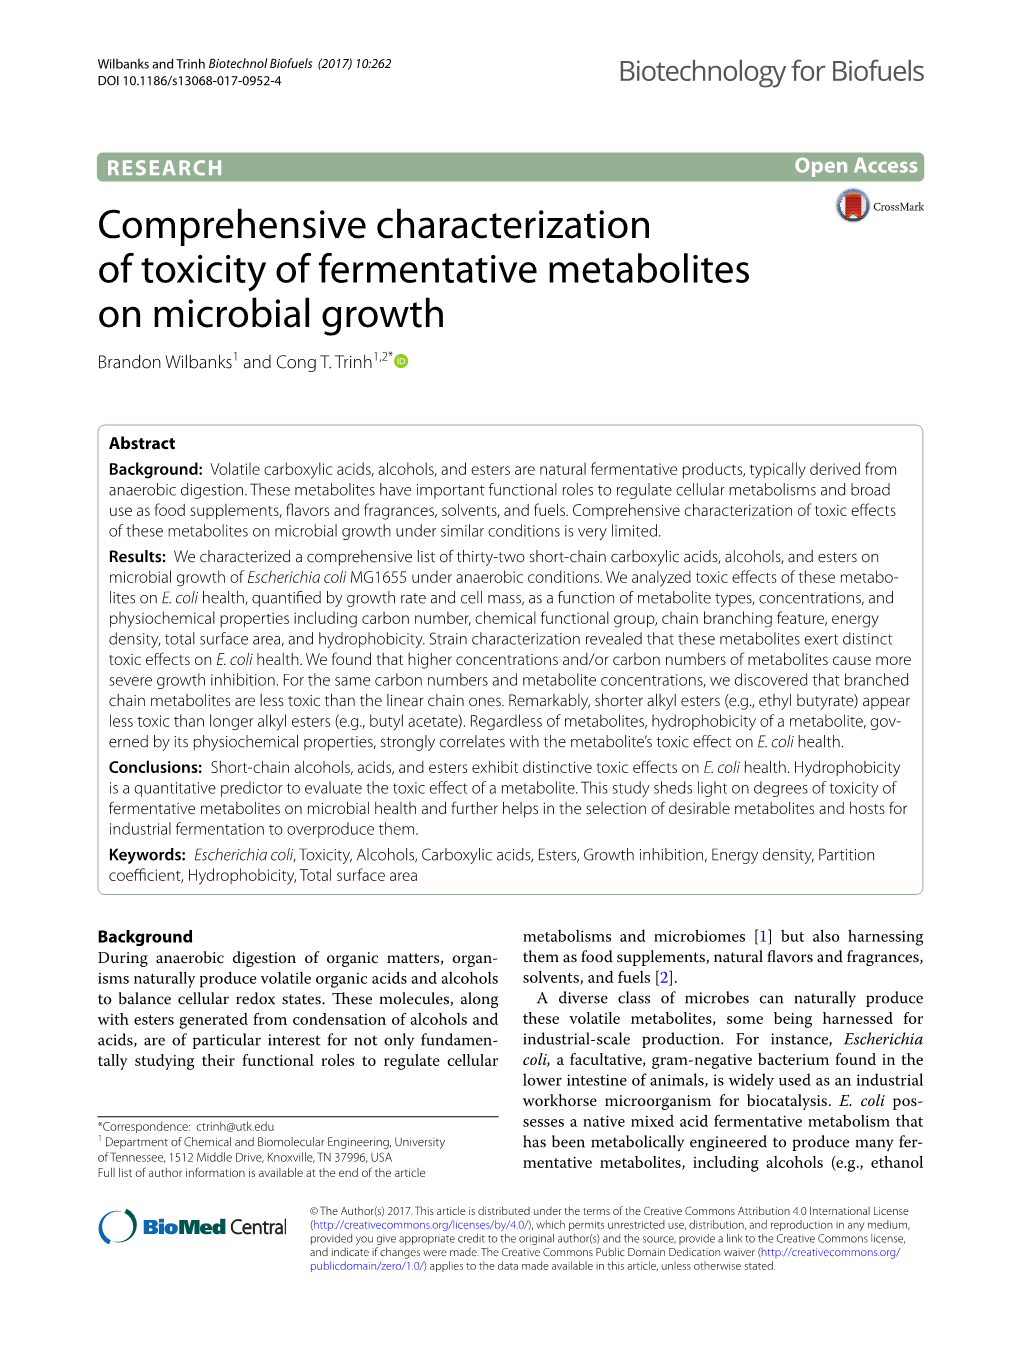 Comprehensive Characterization of Toxicity of Fermentative Metabolites on Microbial Growth Brandon Wilbanks1 and Cong T